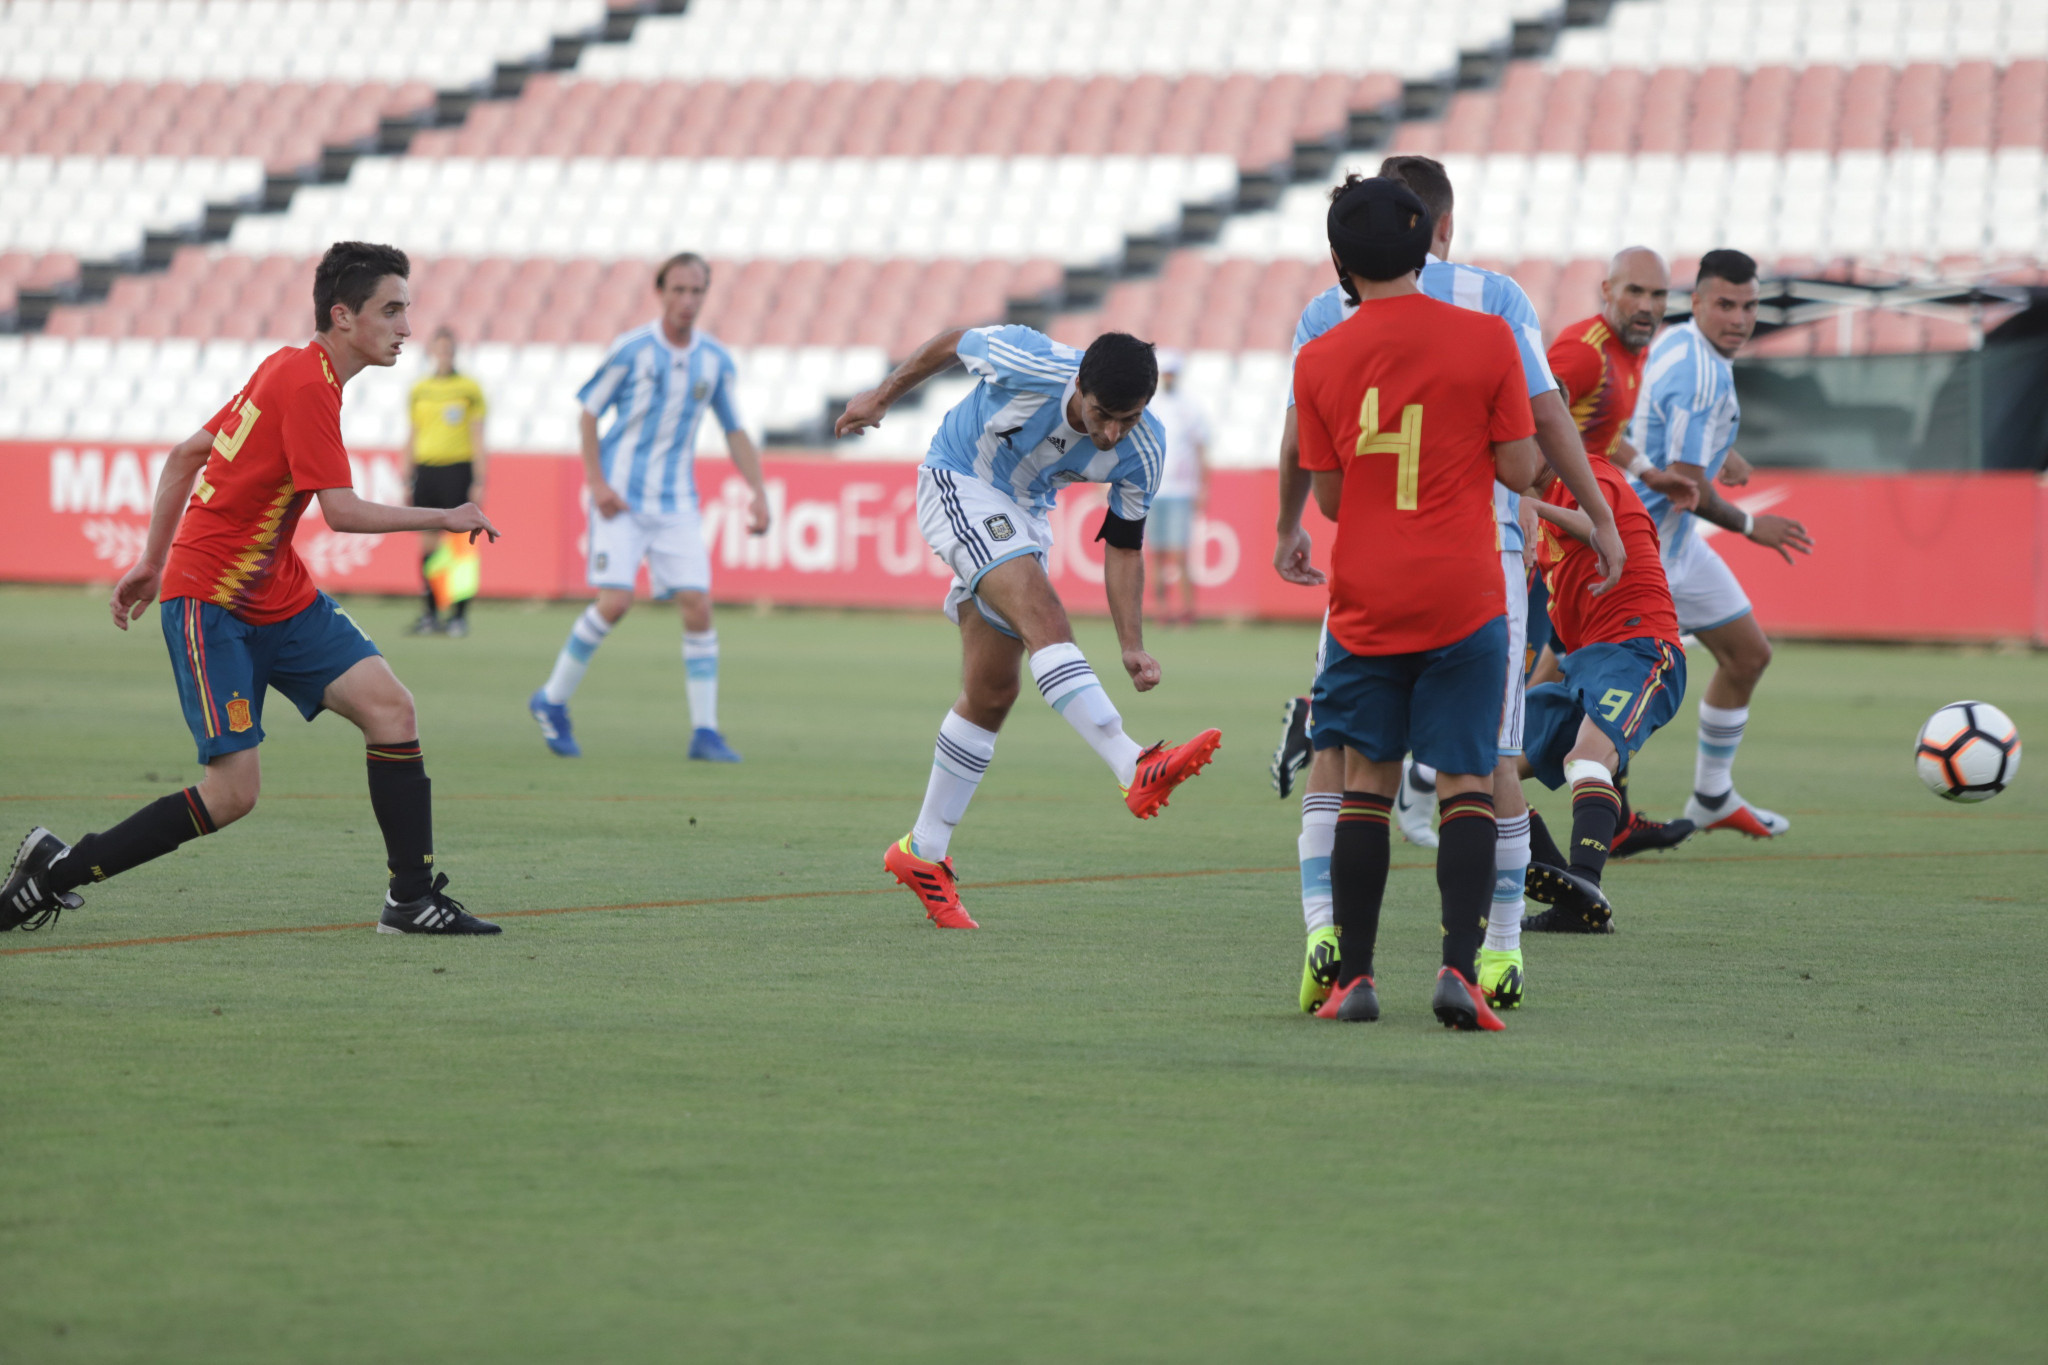 Argentina thrash hosts Spain in opening match of IFCPF World Cup